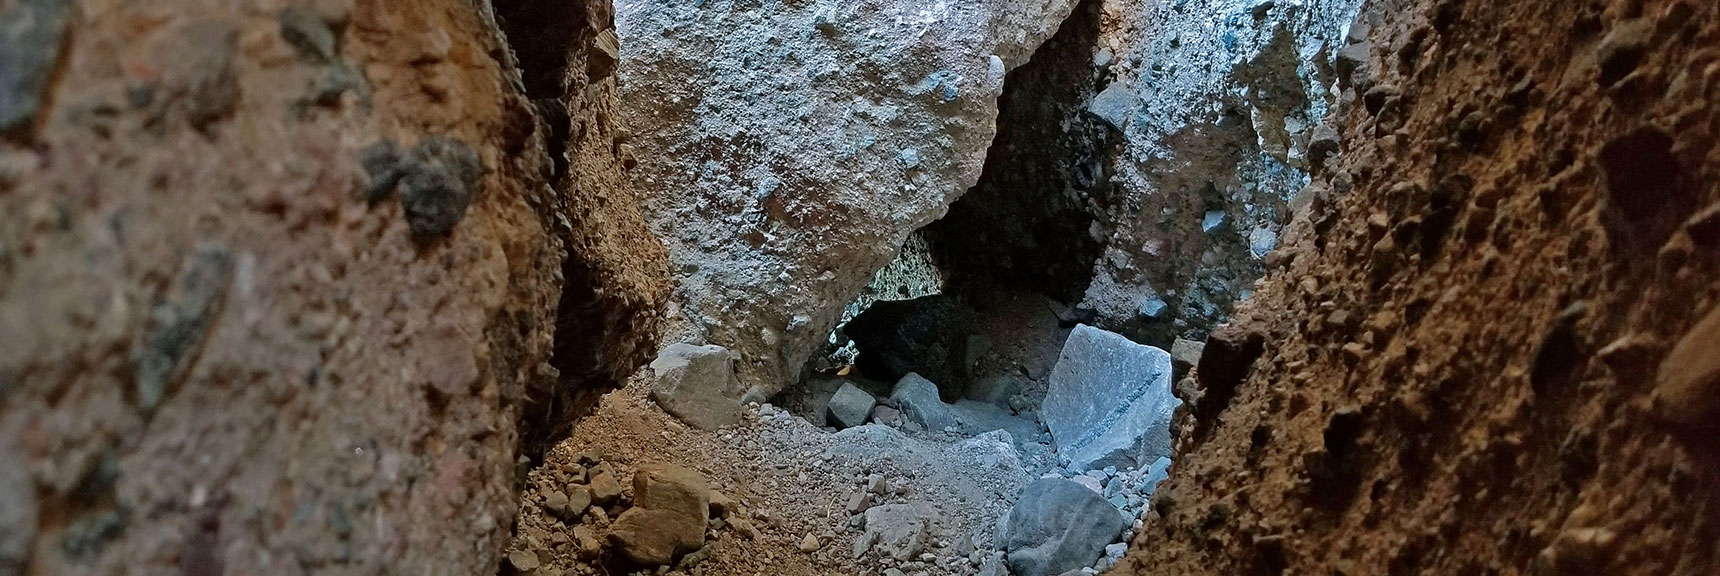 A View Through the First Slot Crawl Space | Sidewinder Canyon | Death Valley National Park, California